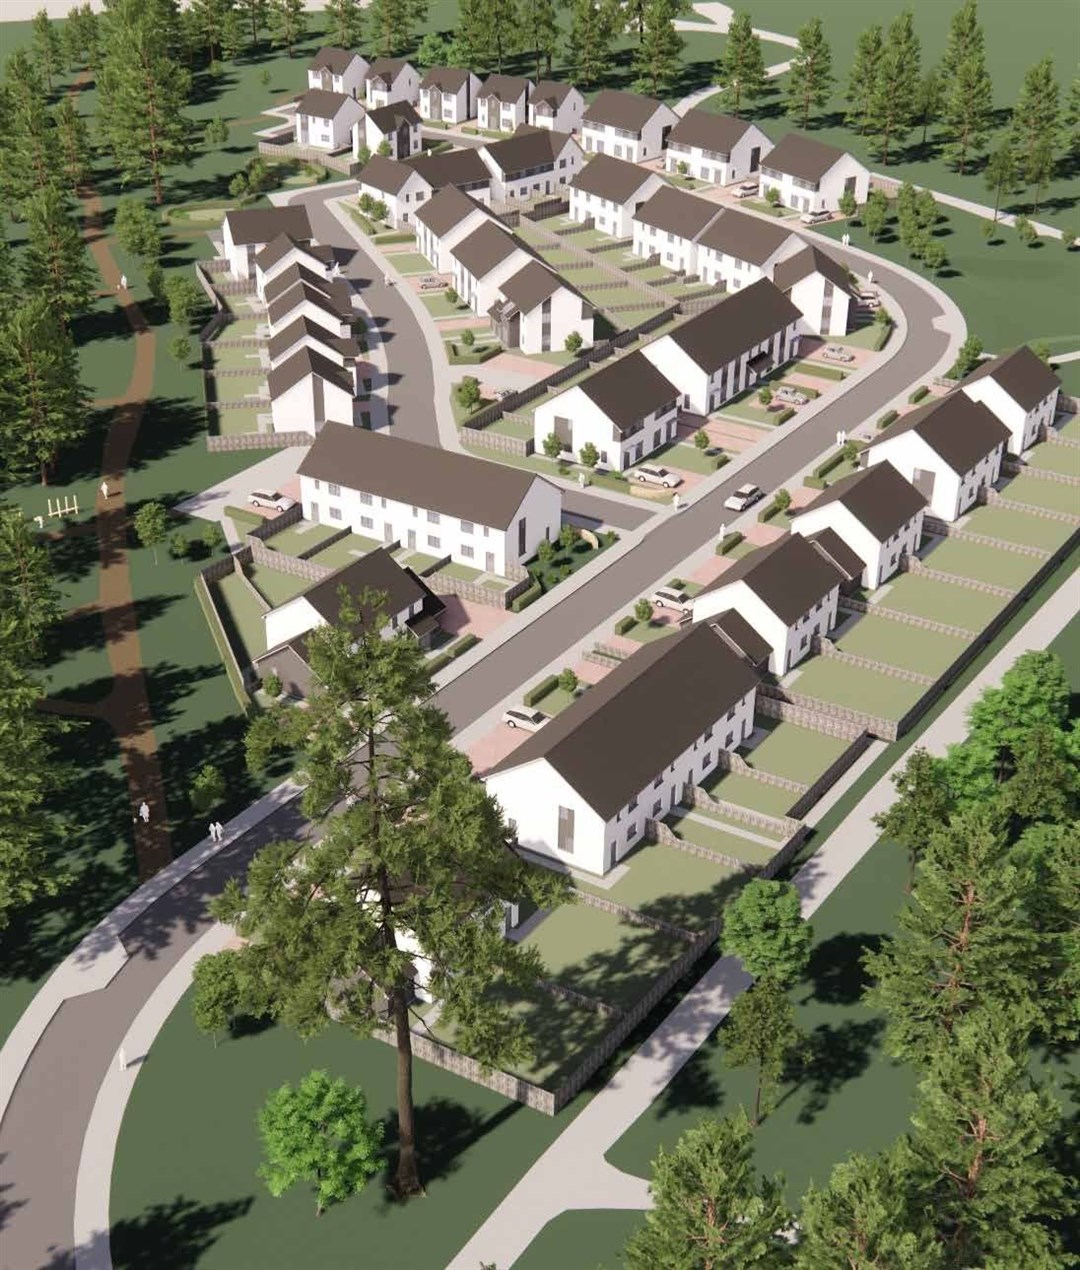 The 66-home development in Invergordon is the first major scheme to be granted in the area since the Cromarty Firth freeport go-ahead.Picture: Capstone